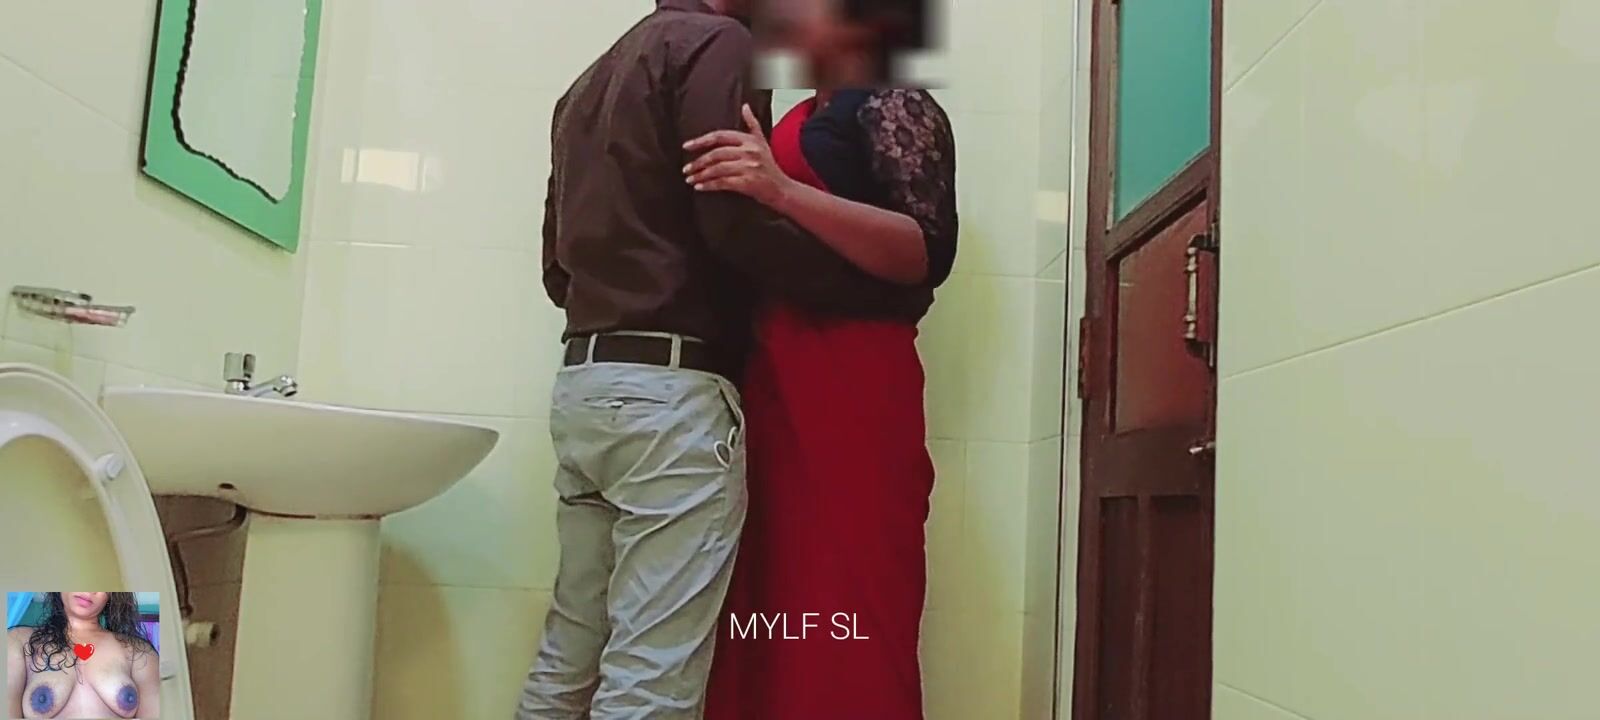 Boss had sex inside the office bathroom with Hot Milf watch online image